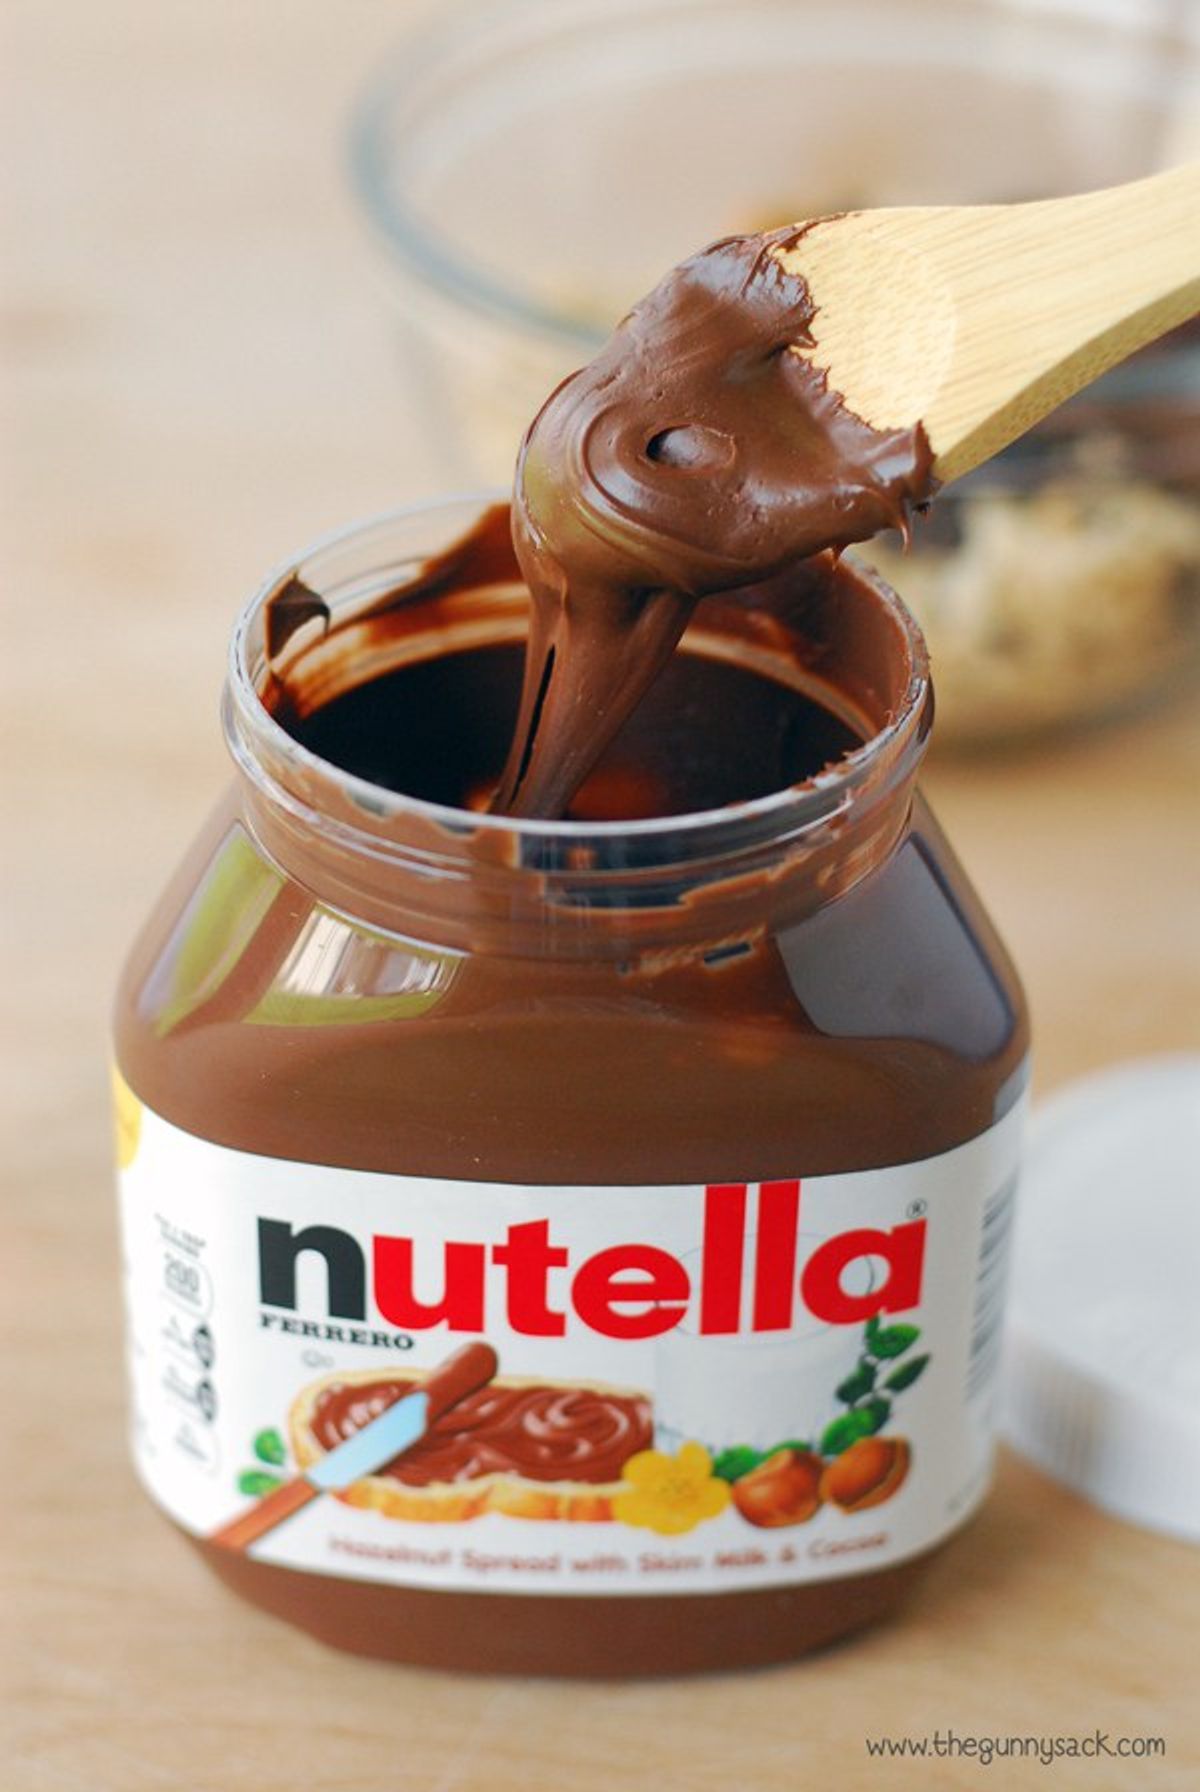 7 Life-Changing Facts About Nutella